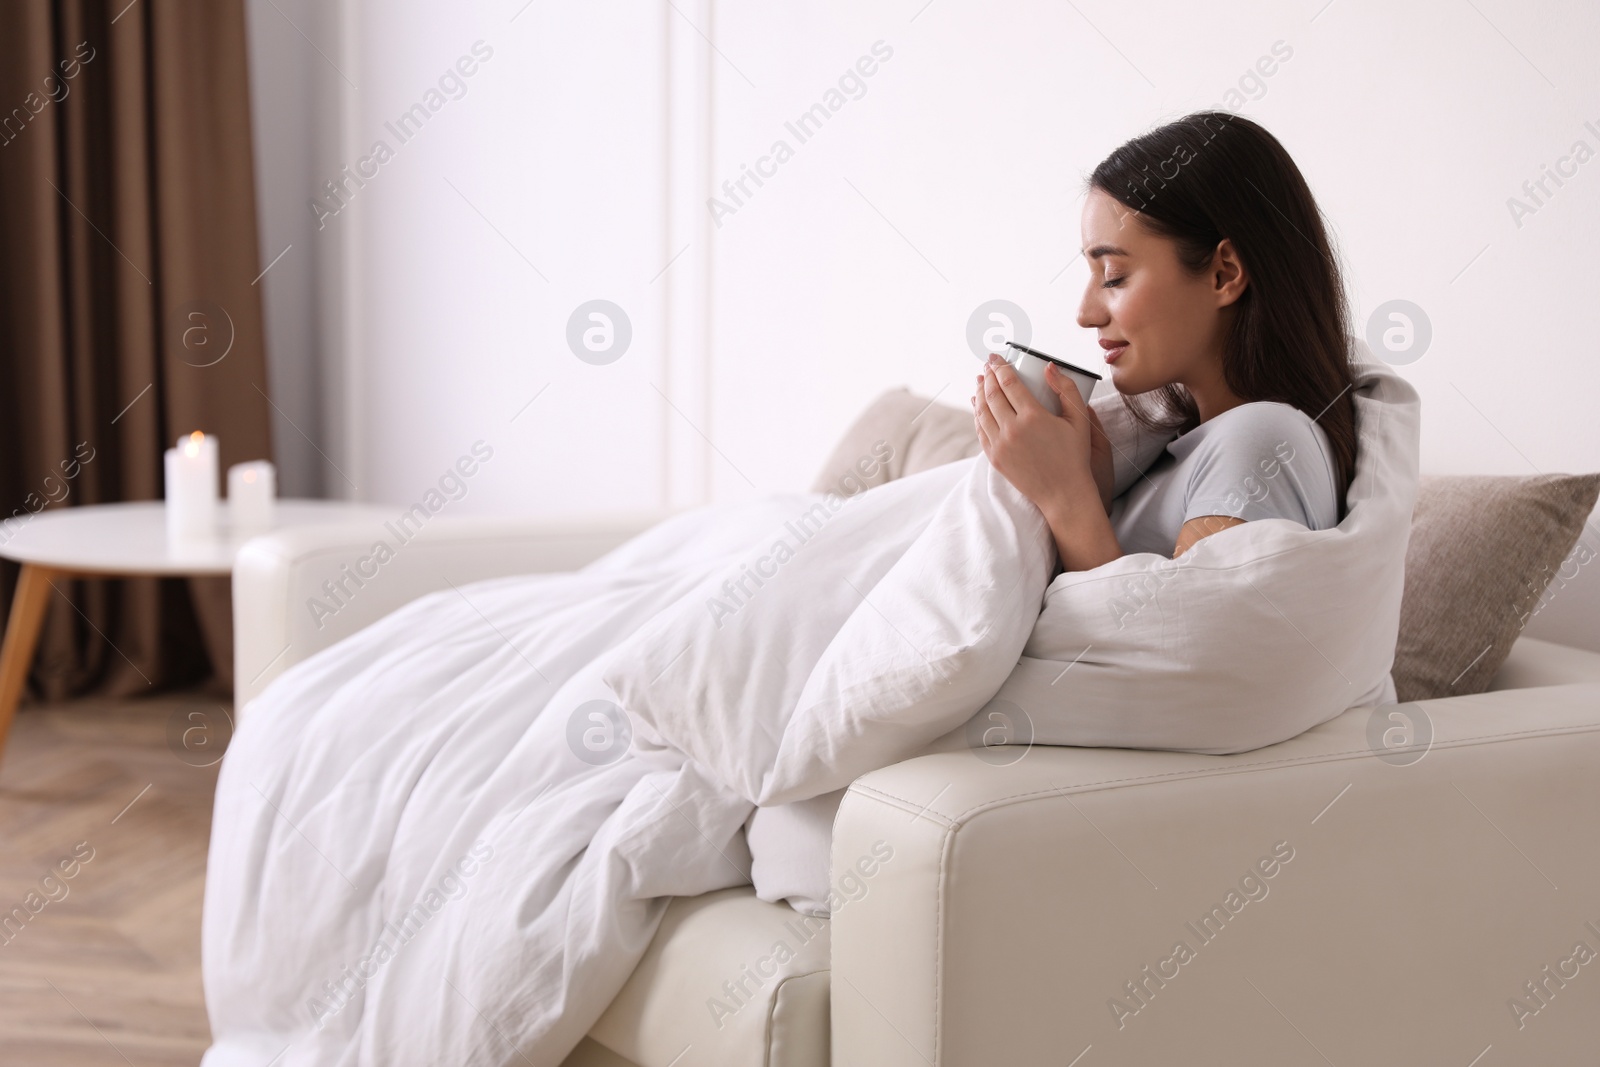 Photo of Woman covered in blanket holding cup of drink on sofa, space for text